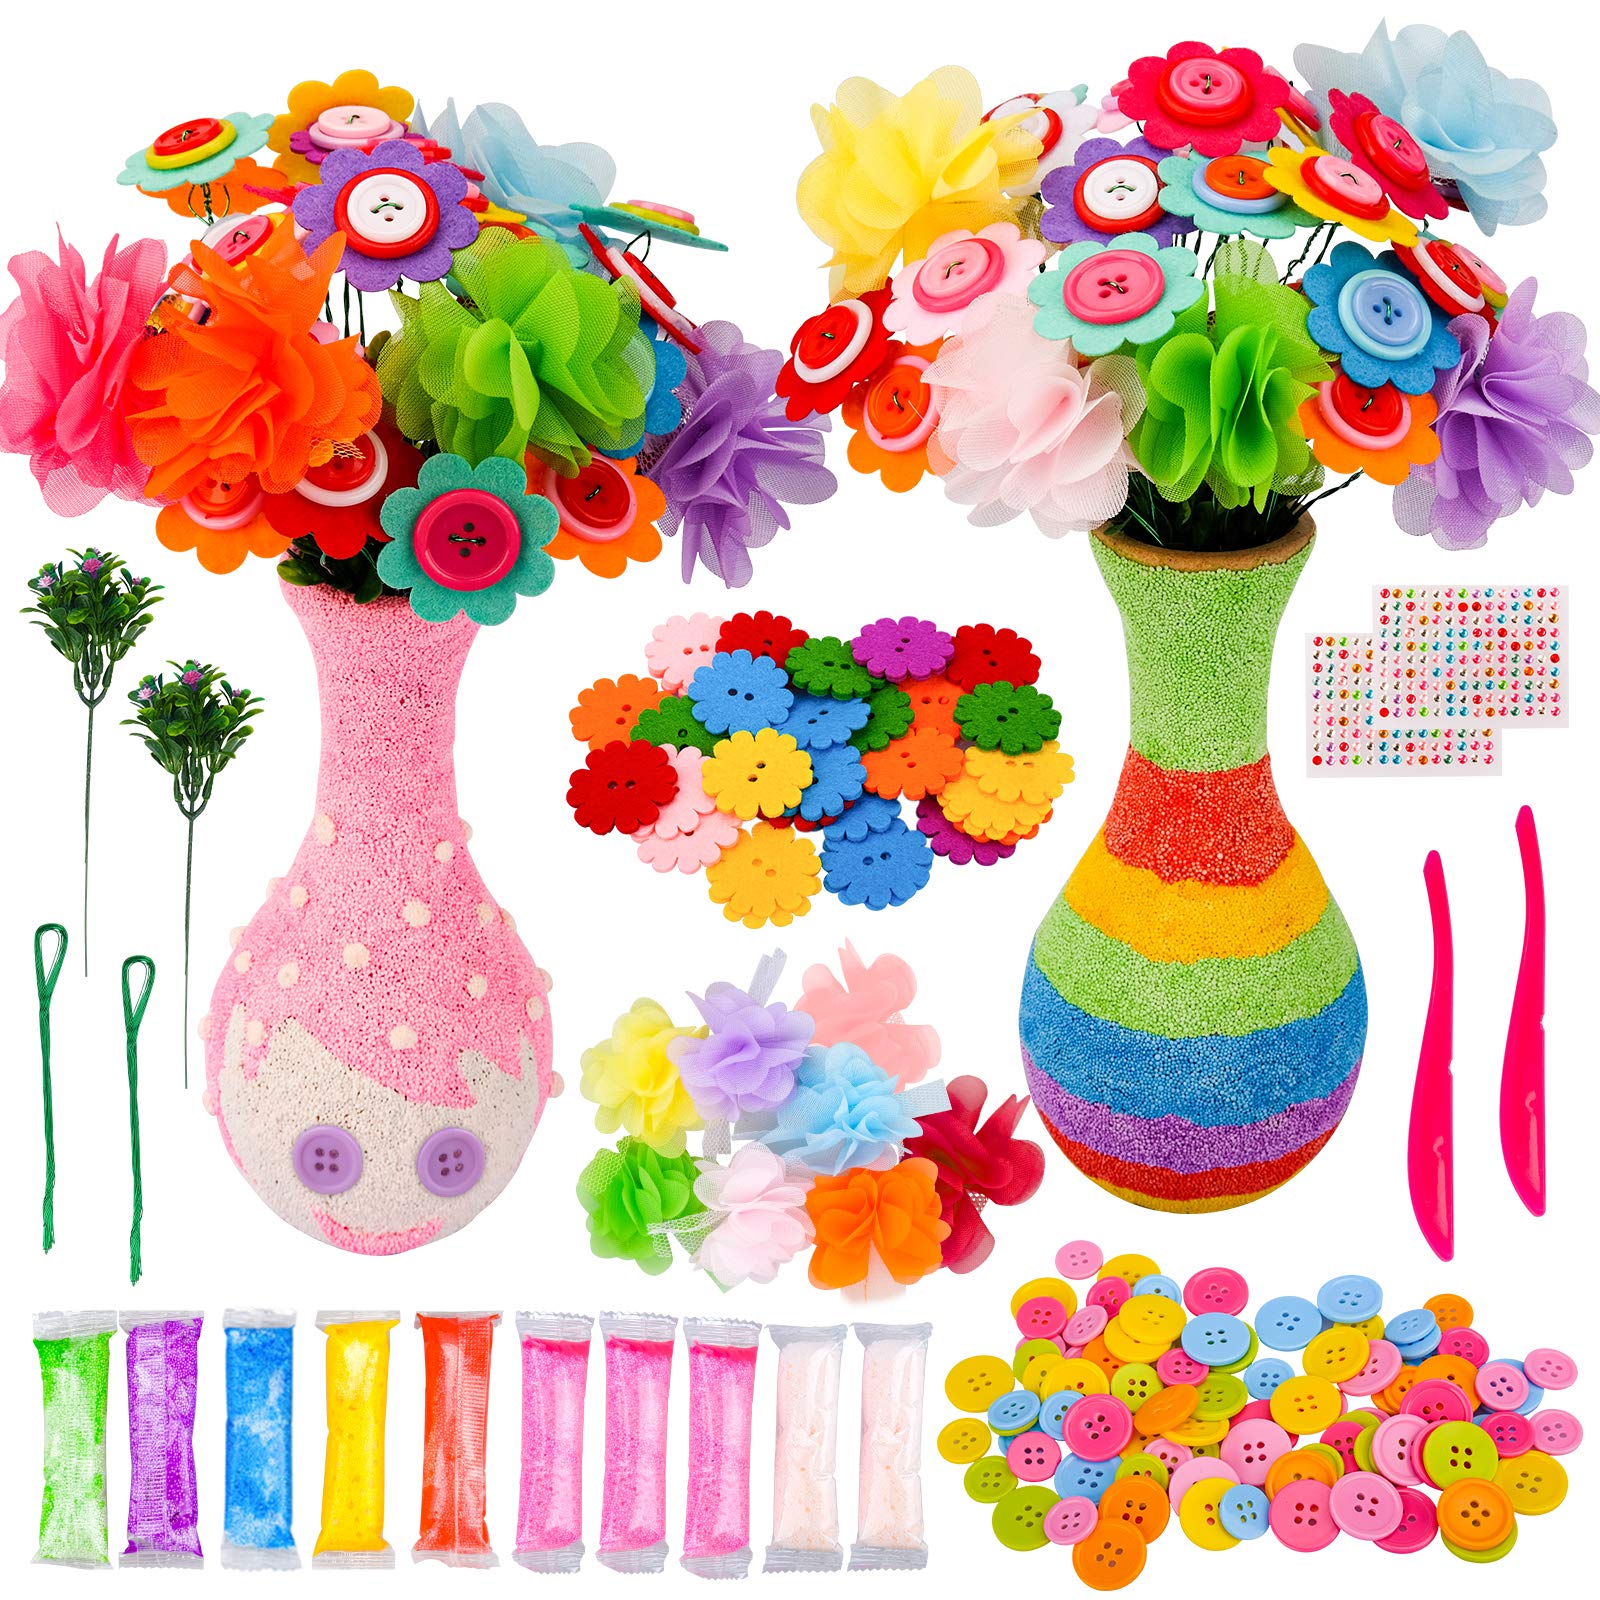 Dikence Toys for 8 9 10 11 12 Year Olds GirlsorBoys, Art&Crafts Toy Gifts for Kids Age 5-12 Girl Crafts Flower Craft Kit for 8-10 yr Olds Child DIY Toy Set for Teen 7-11 Year Old Birthday Present - image 1 of 7